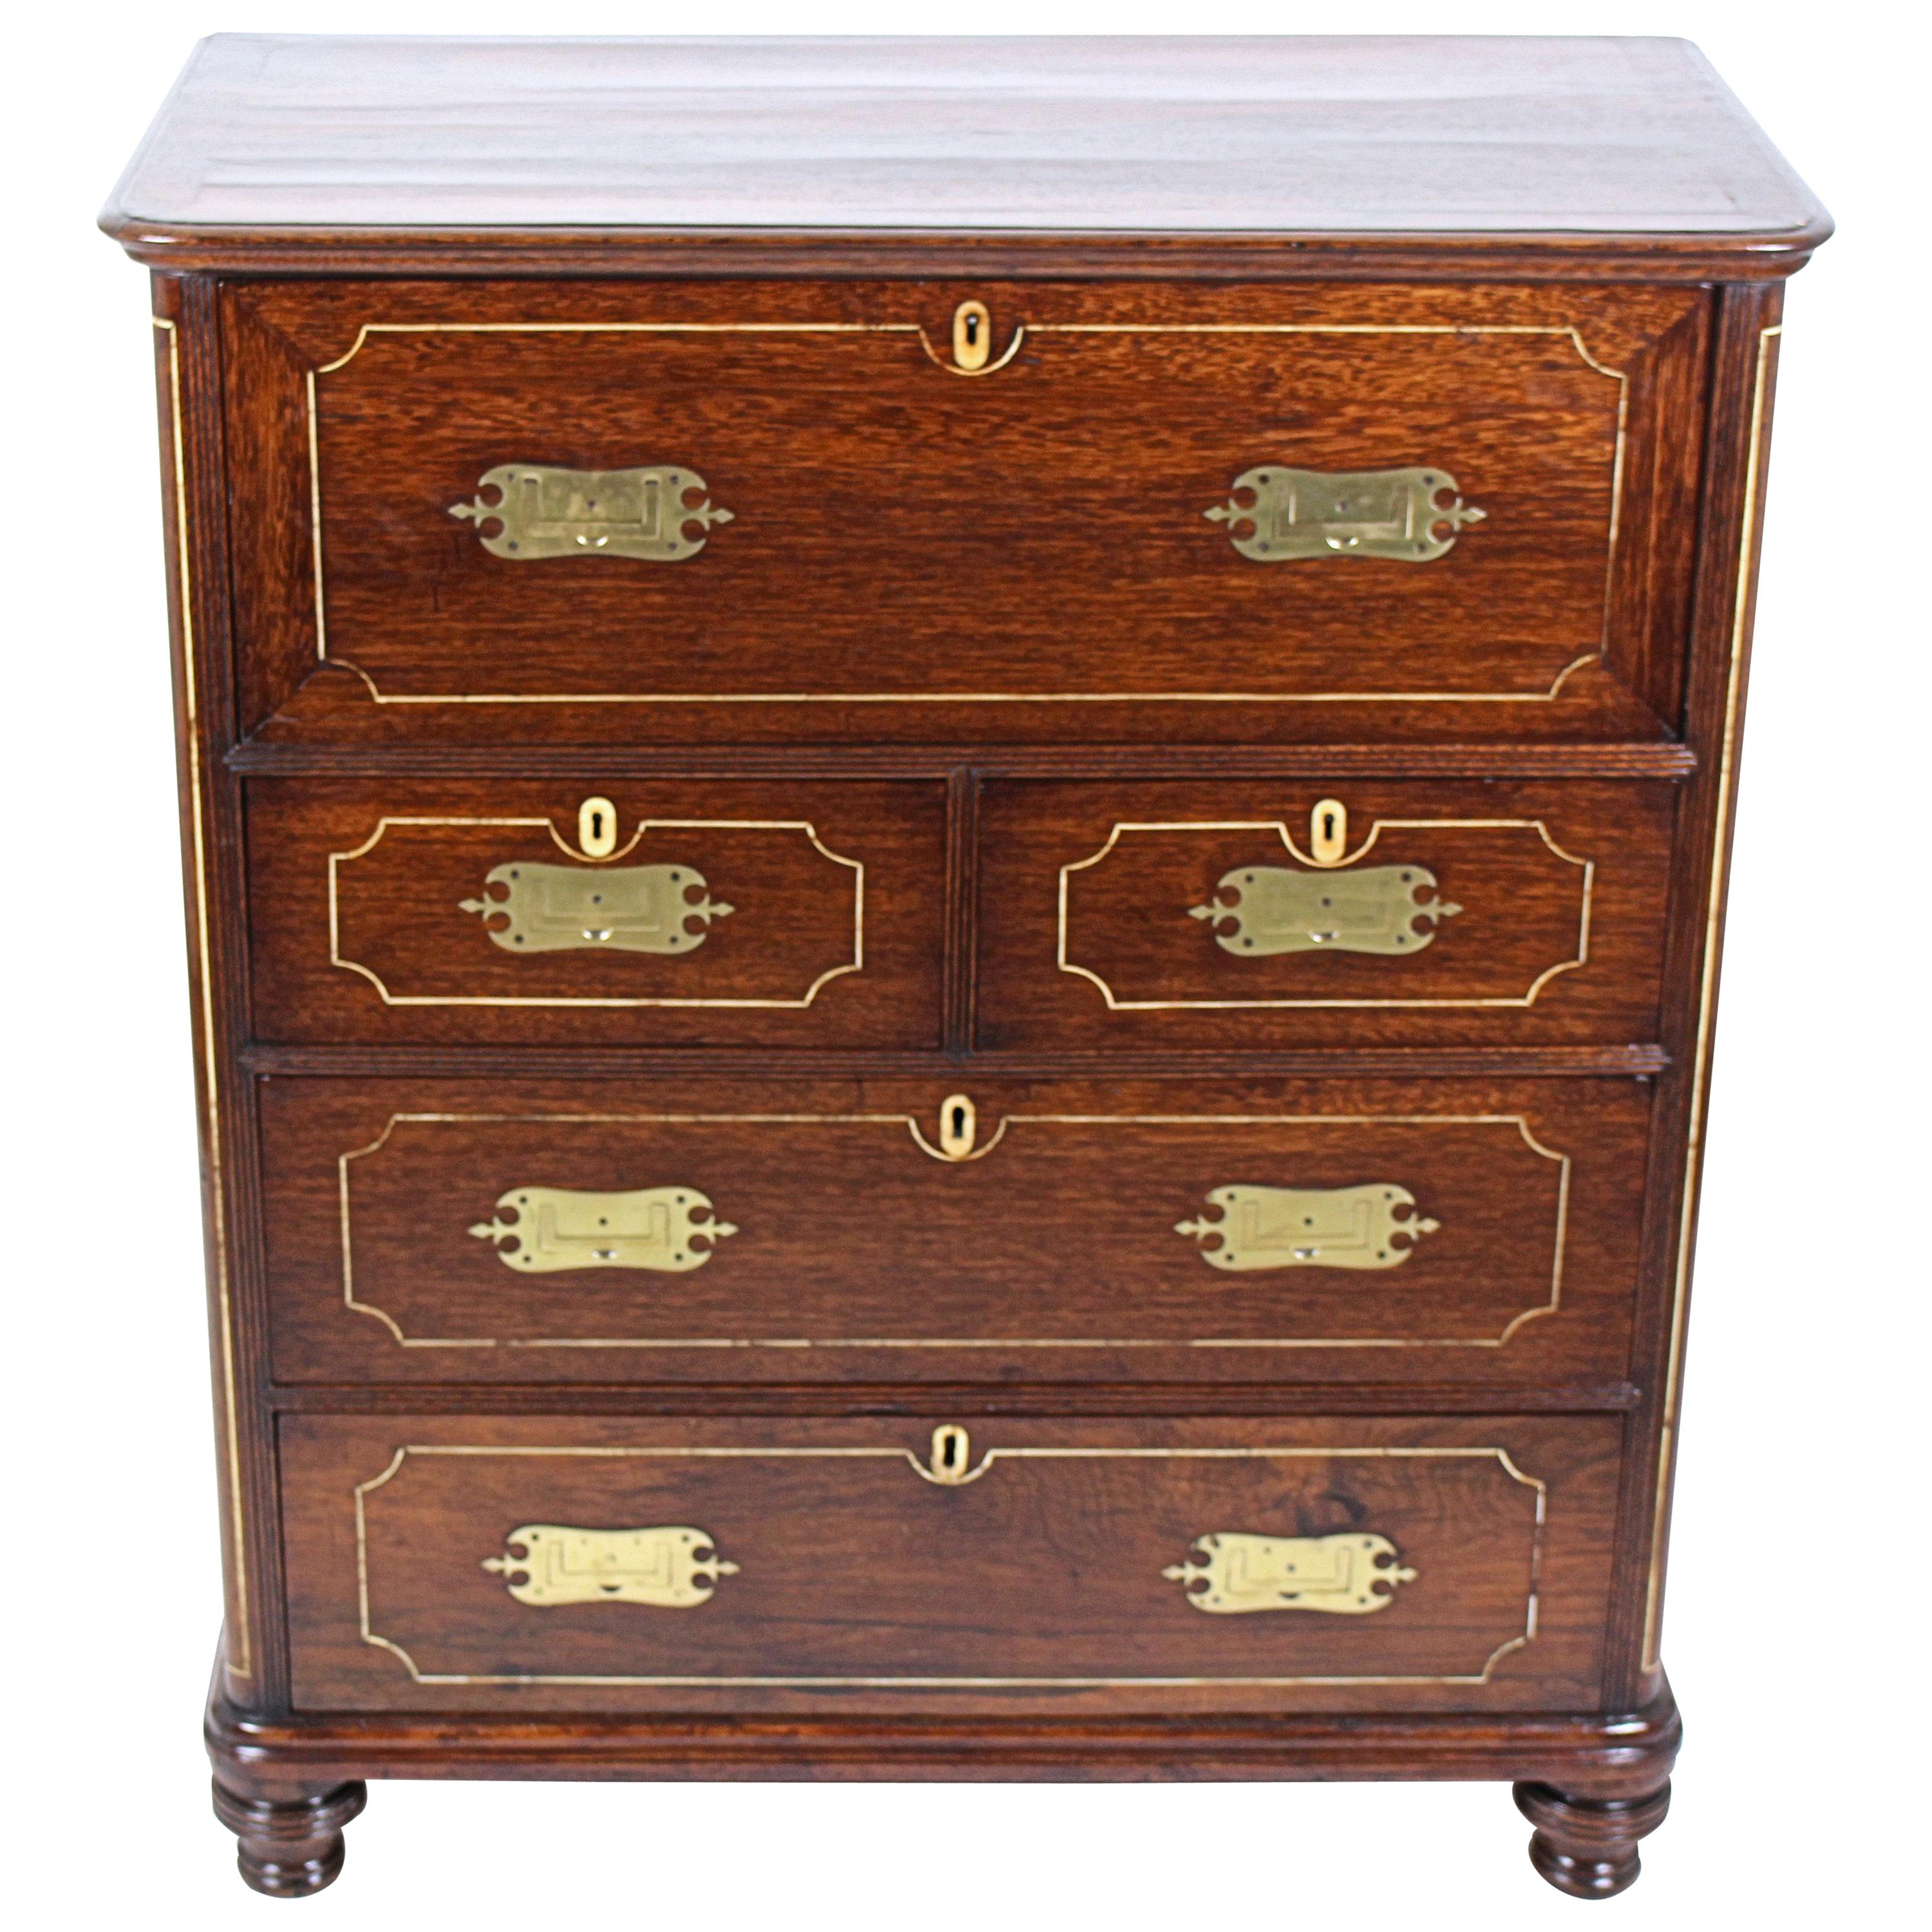 Early 19th Century, Anglo Chinese Padouk Secretaire Chest of Drawers